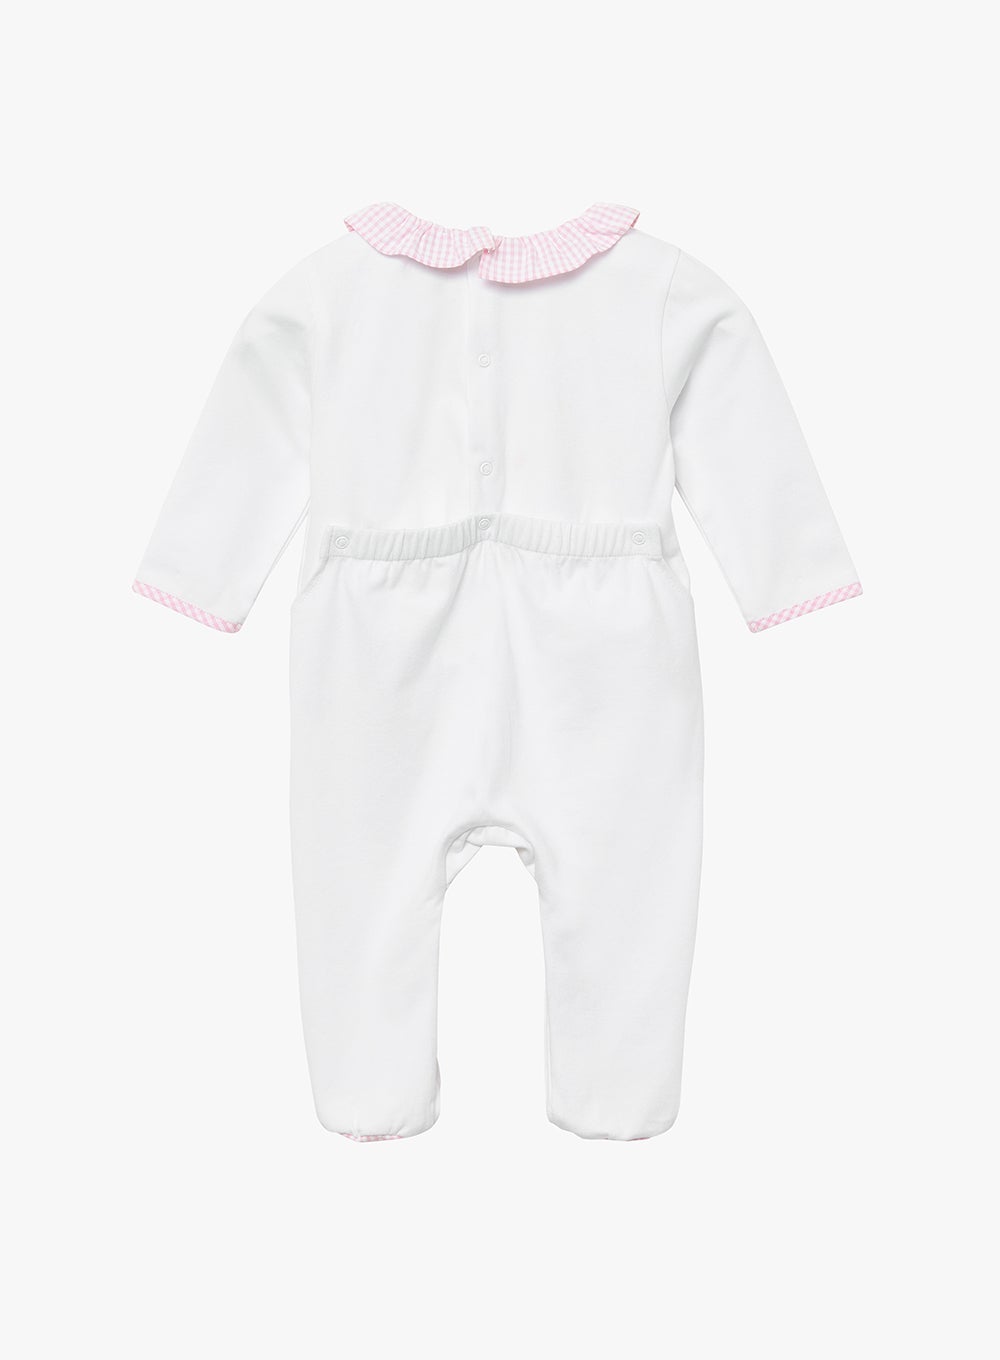 Lapinou All-in-One Little Jemima All-in-One in Pink Gingham